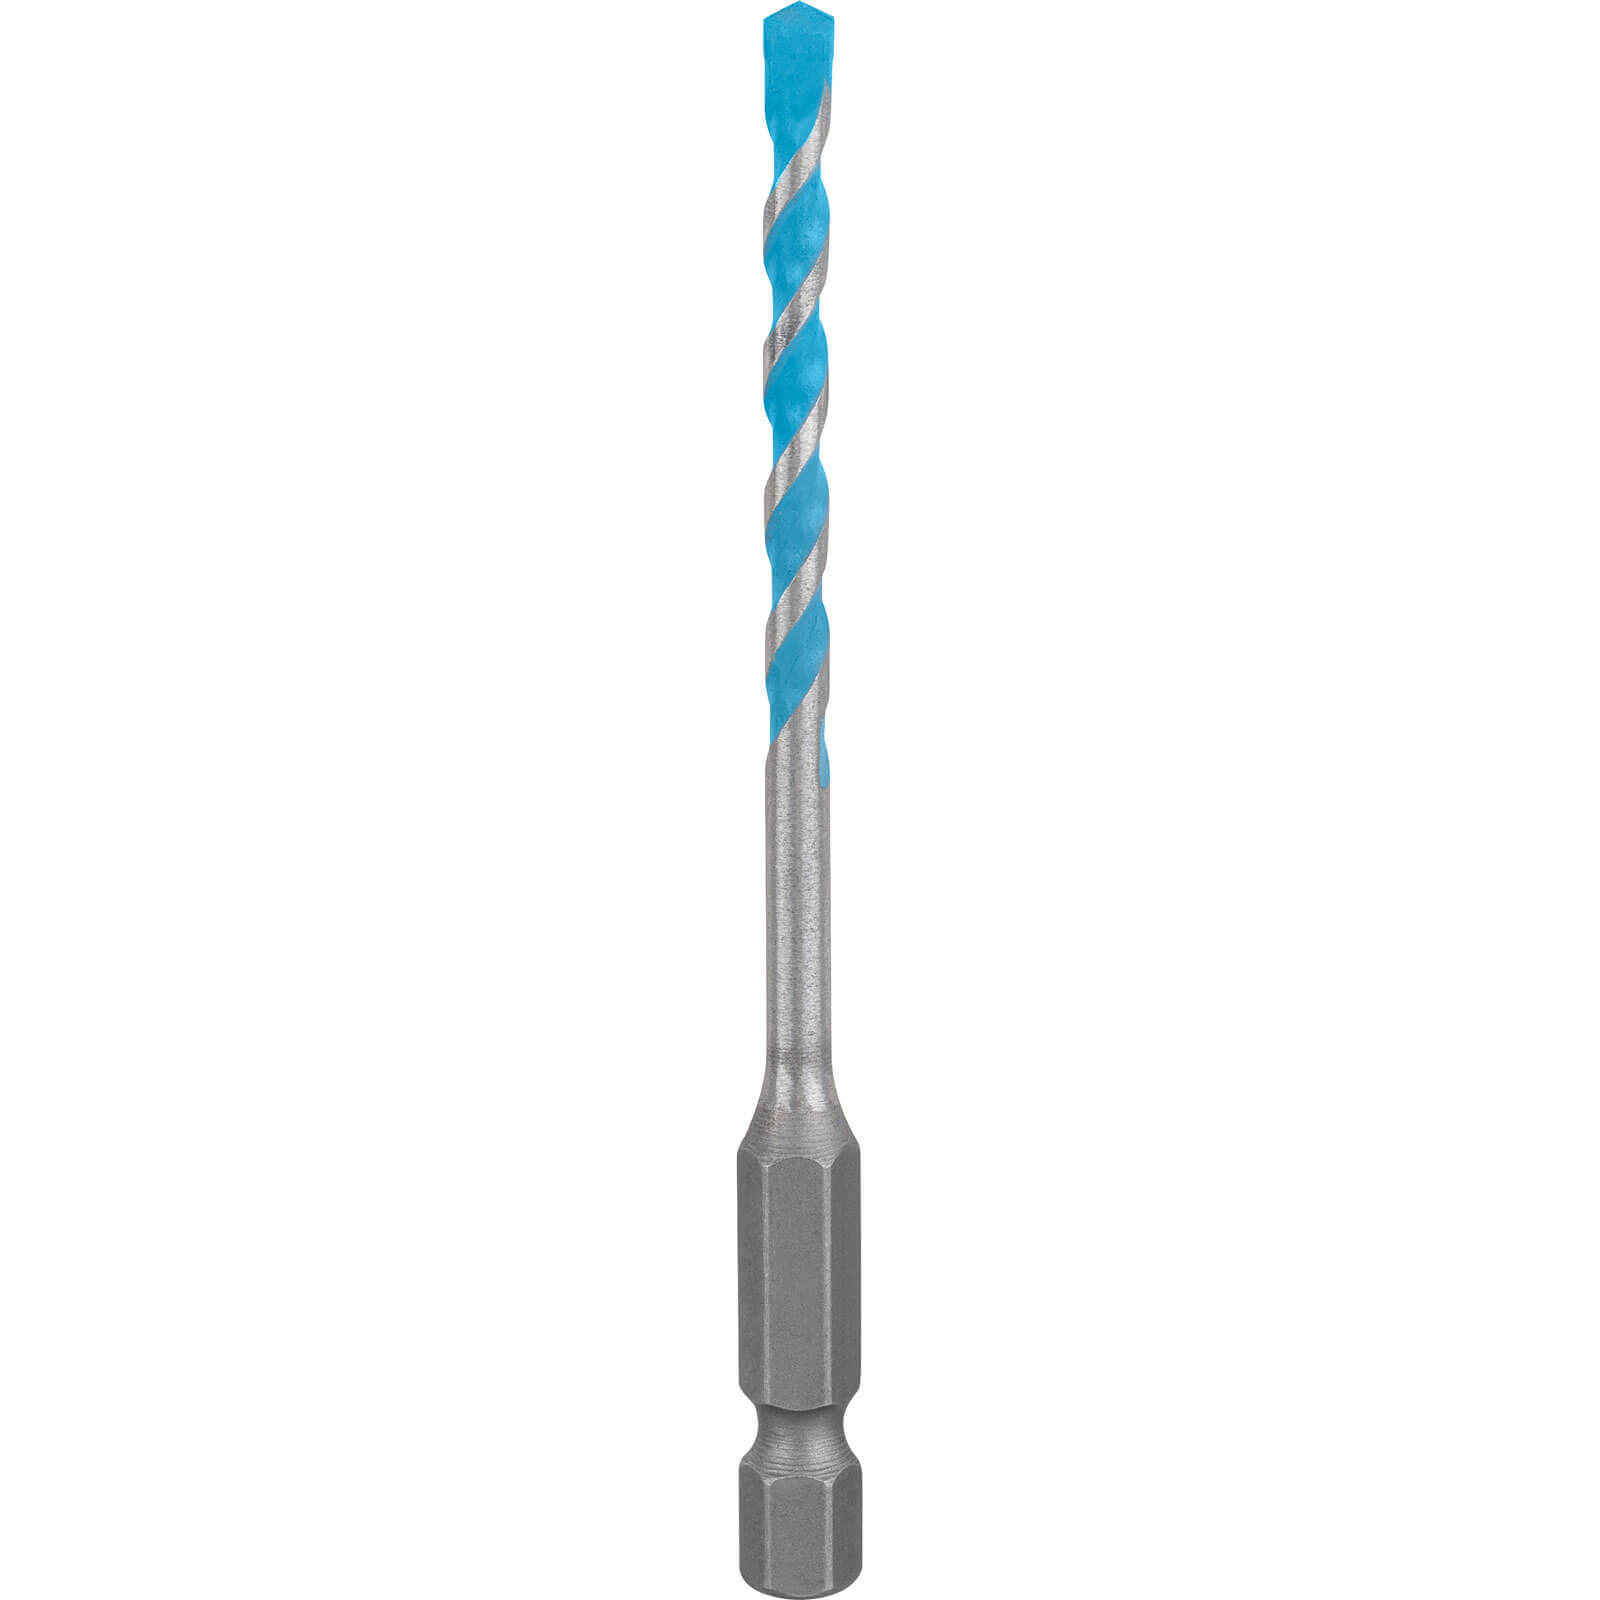 Image of Bosch Expert HEX-9 Multi Construction Drill Bit 4mm 90mm Pack of 1